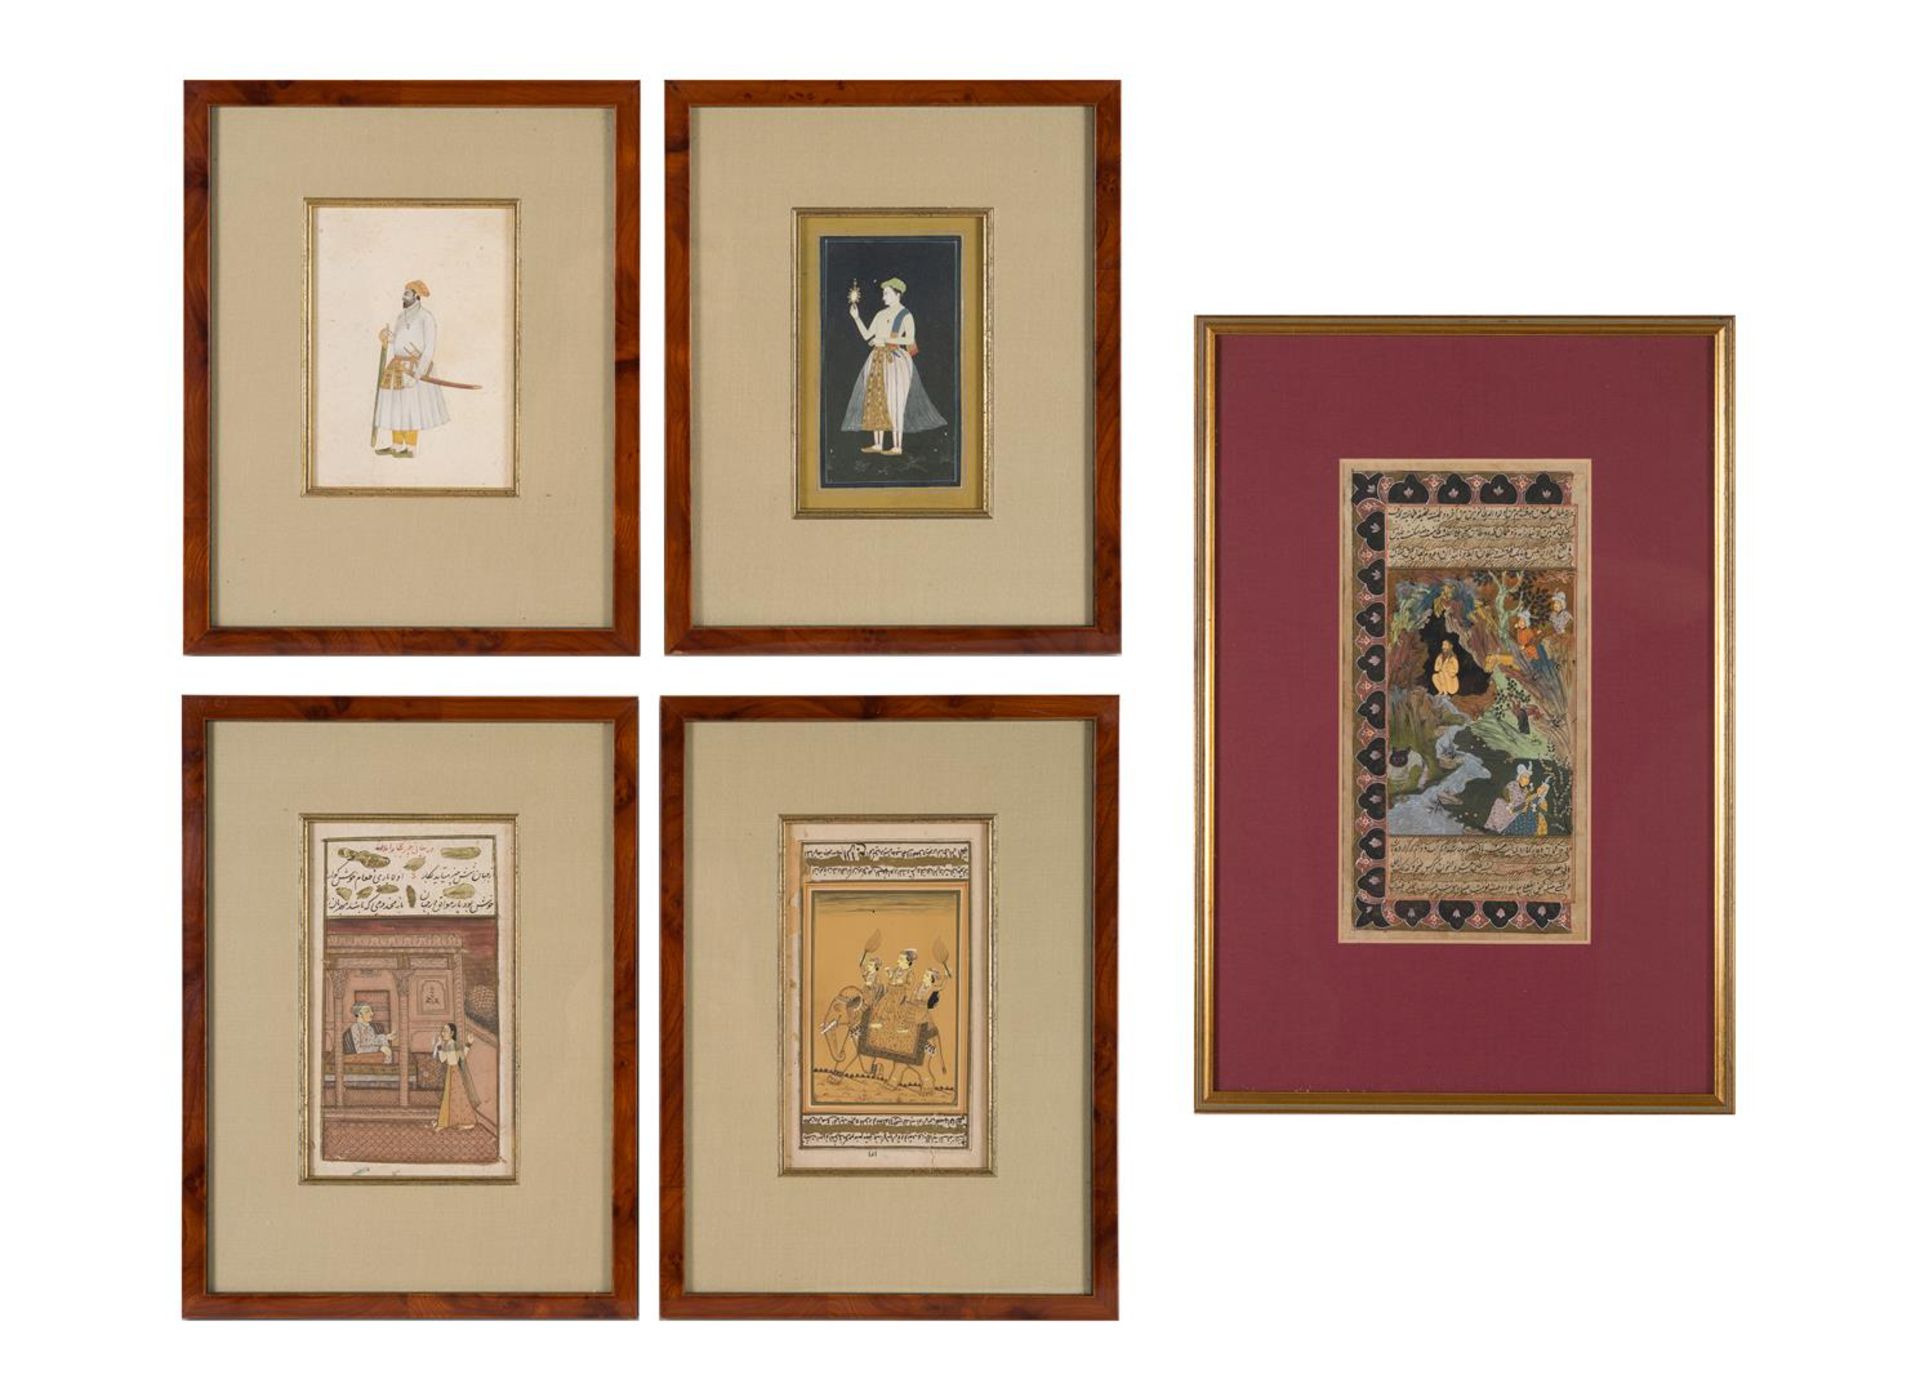 Lot of five diverse miniatures in frame, depicting figures and animals. India, 18th/19th century.